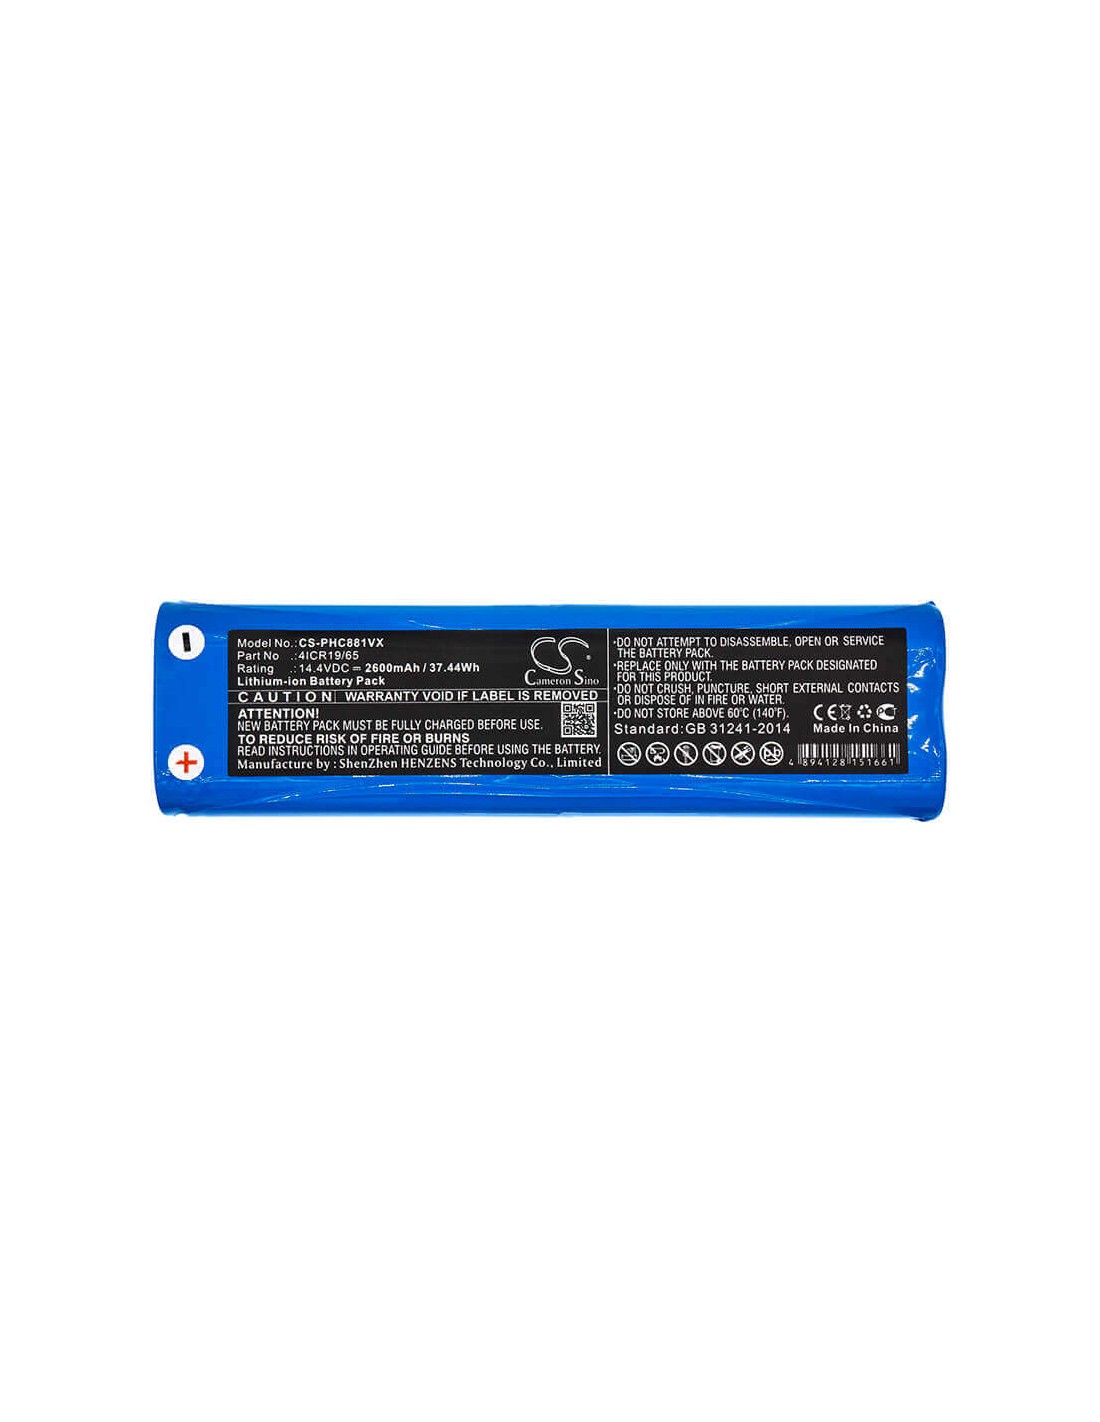 Battery for Bissell, 1974C, 1974D, 1605C, Part No. 1607381 14.4V, 2600mAh - 37.44Wh